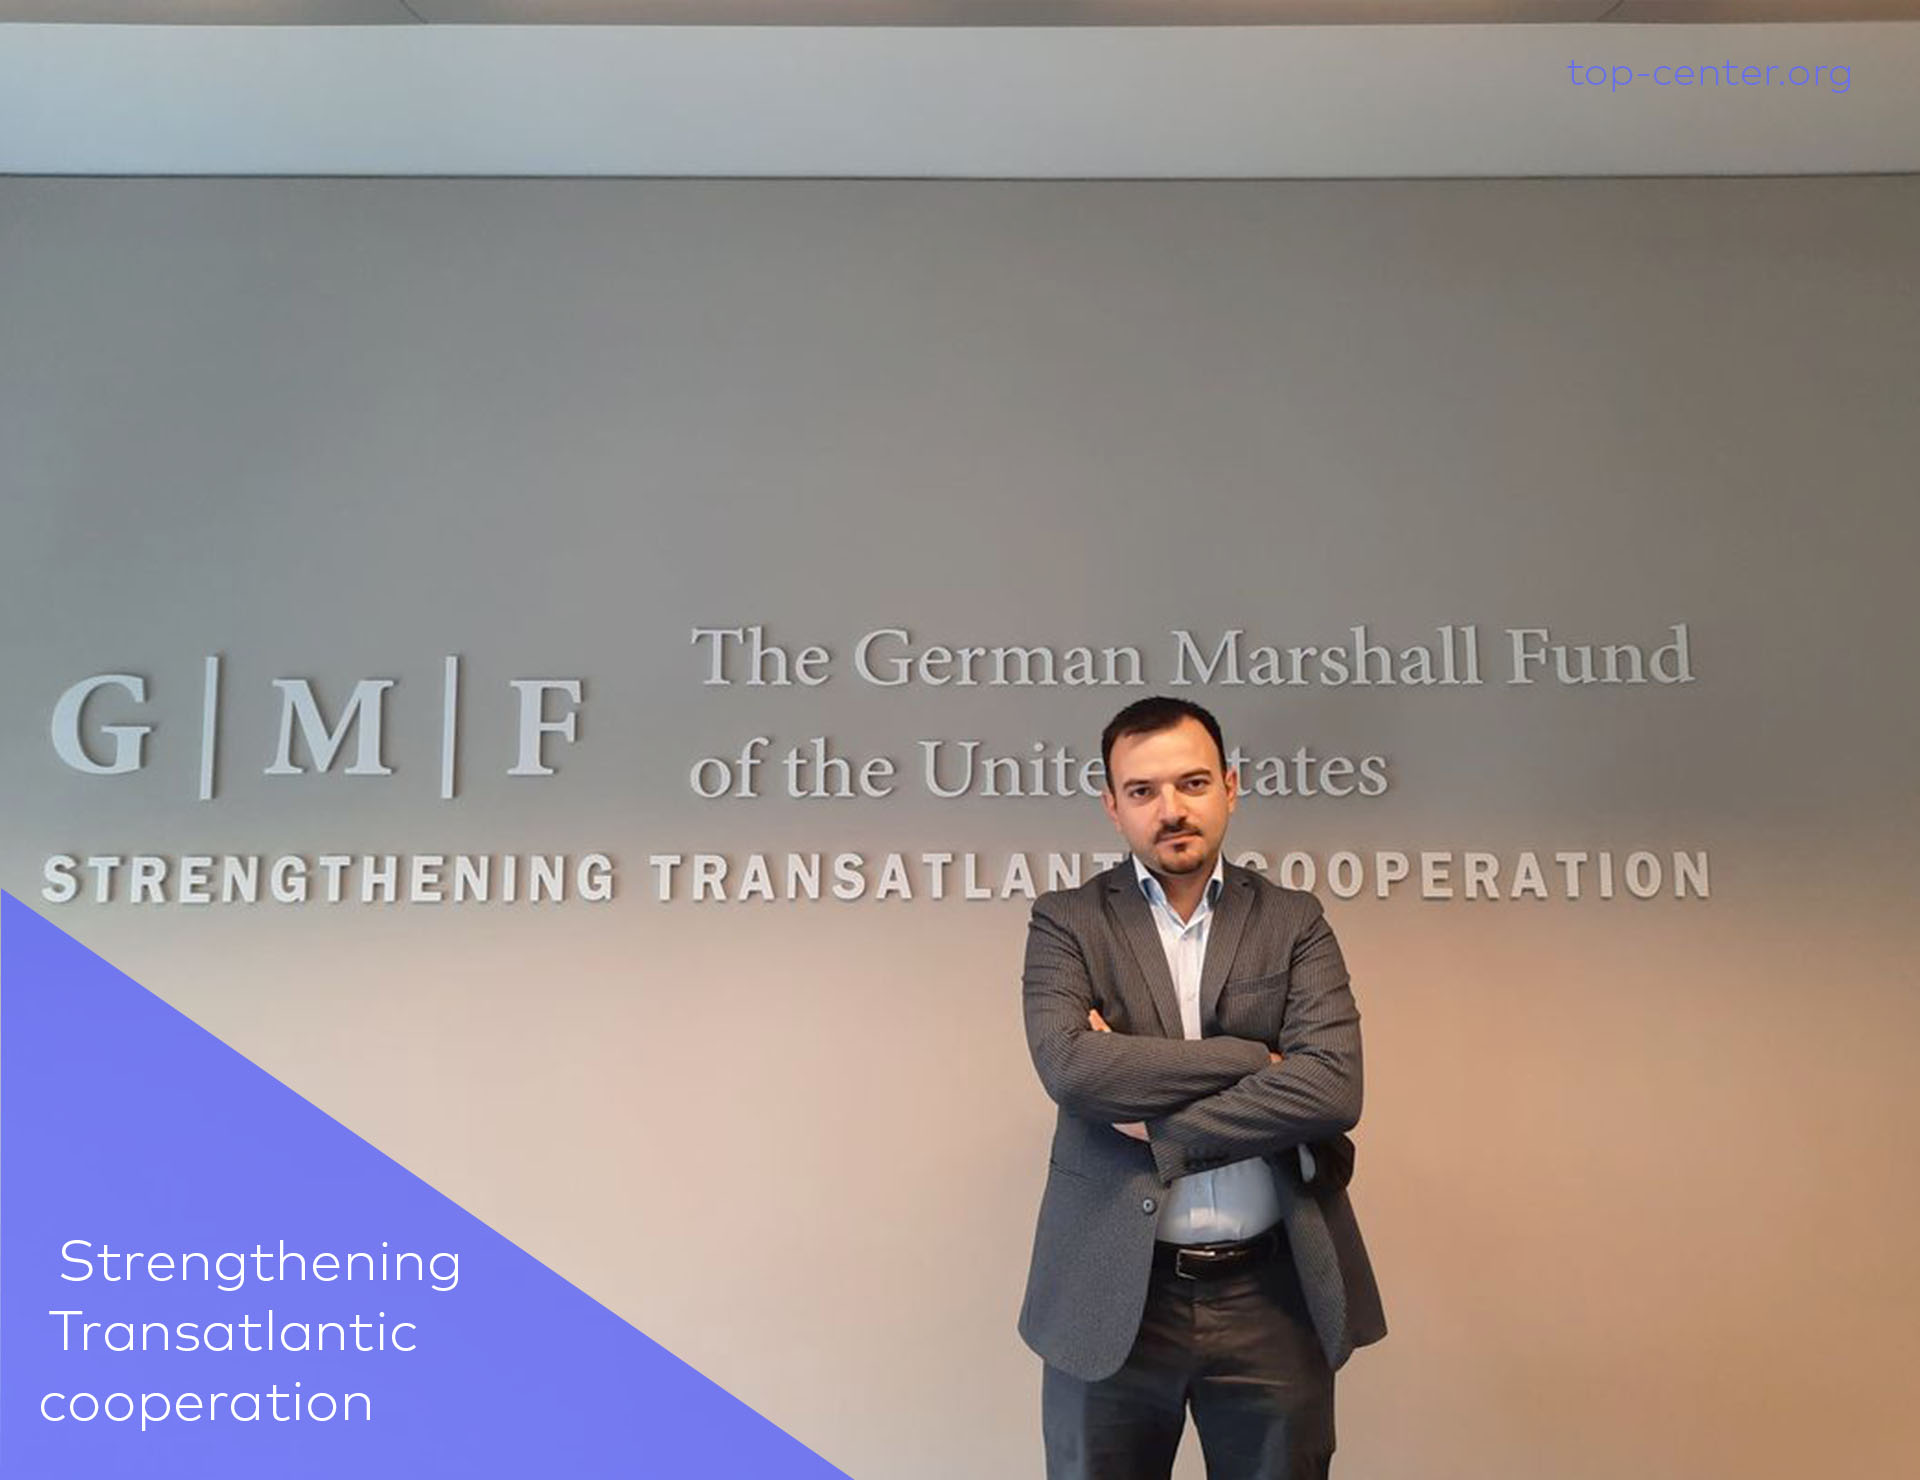 Rusif Huseynov attended a GMF-organized cohort gathering